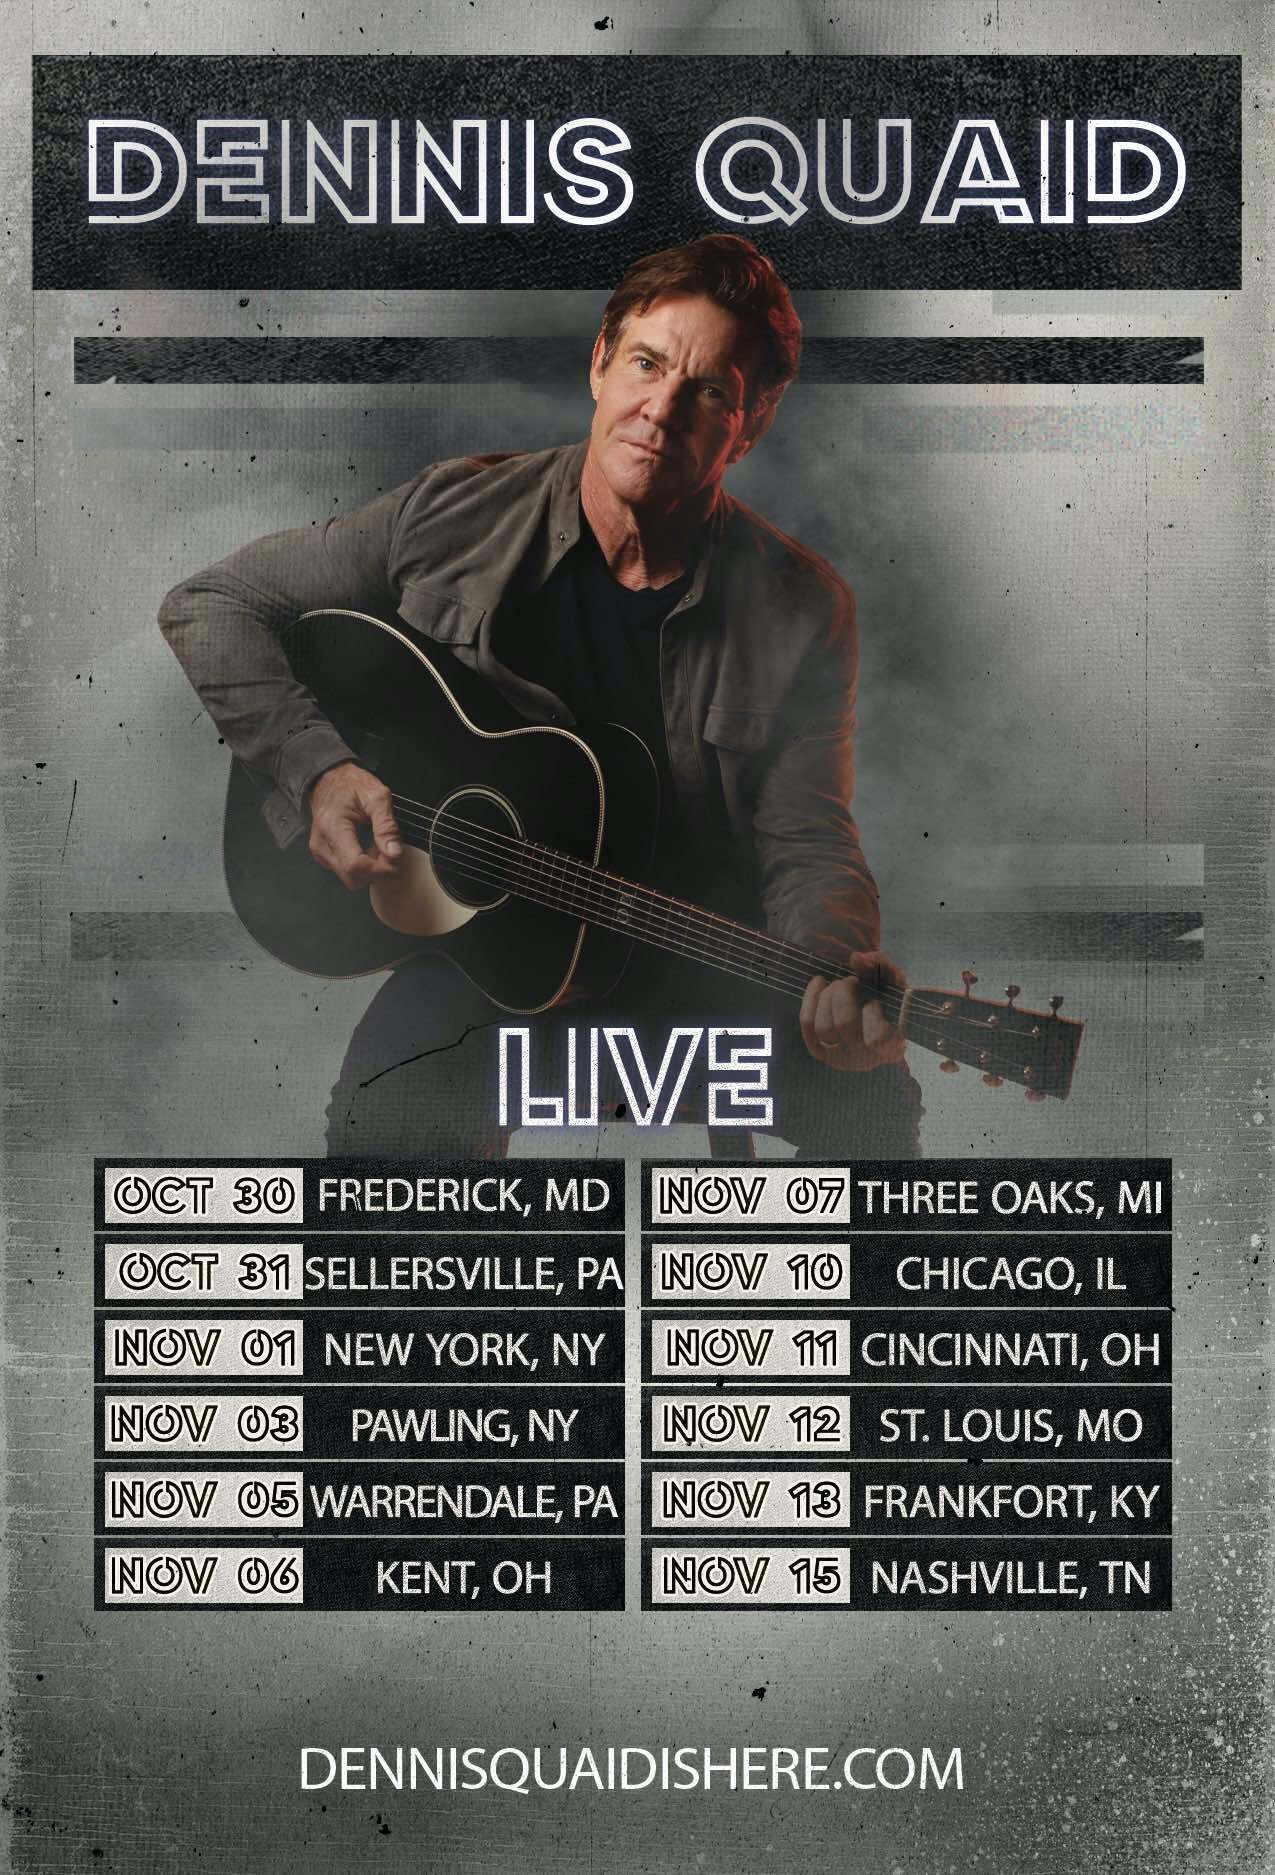 Dennis Quaid Announces Fall Tour and New Album Set for Release in 2022